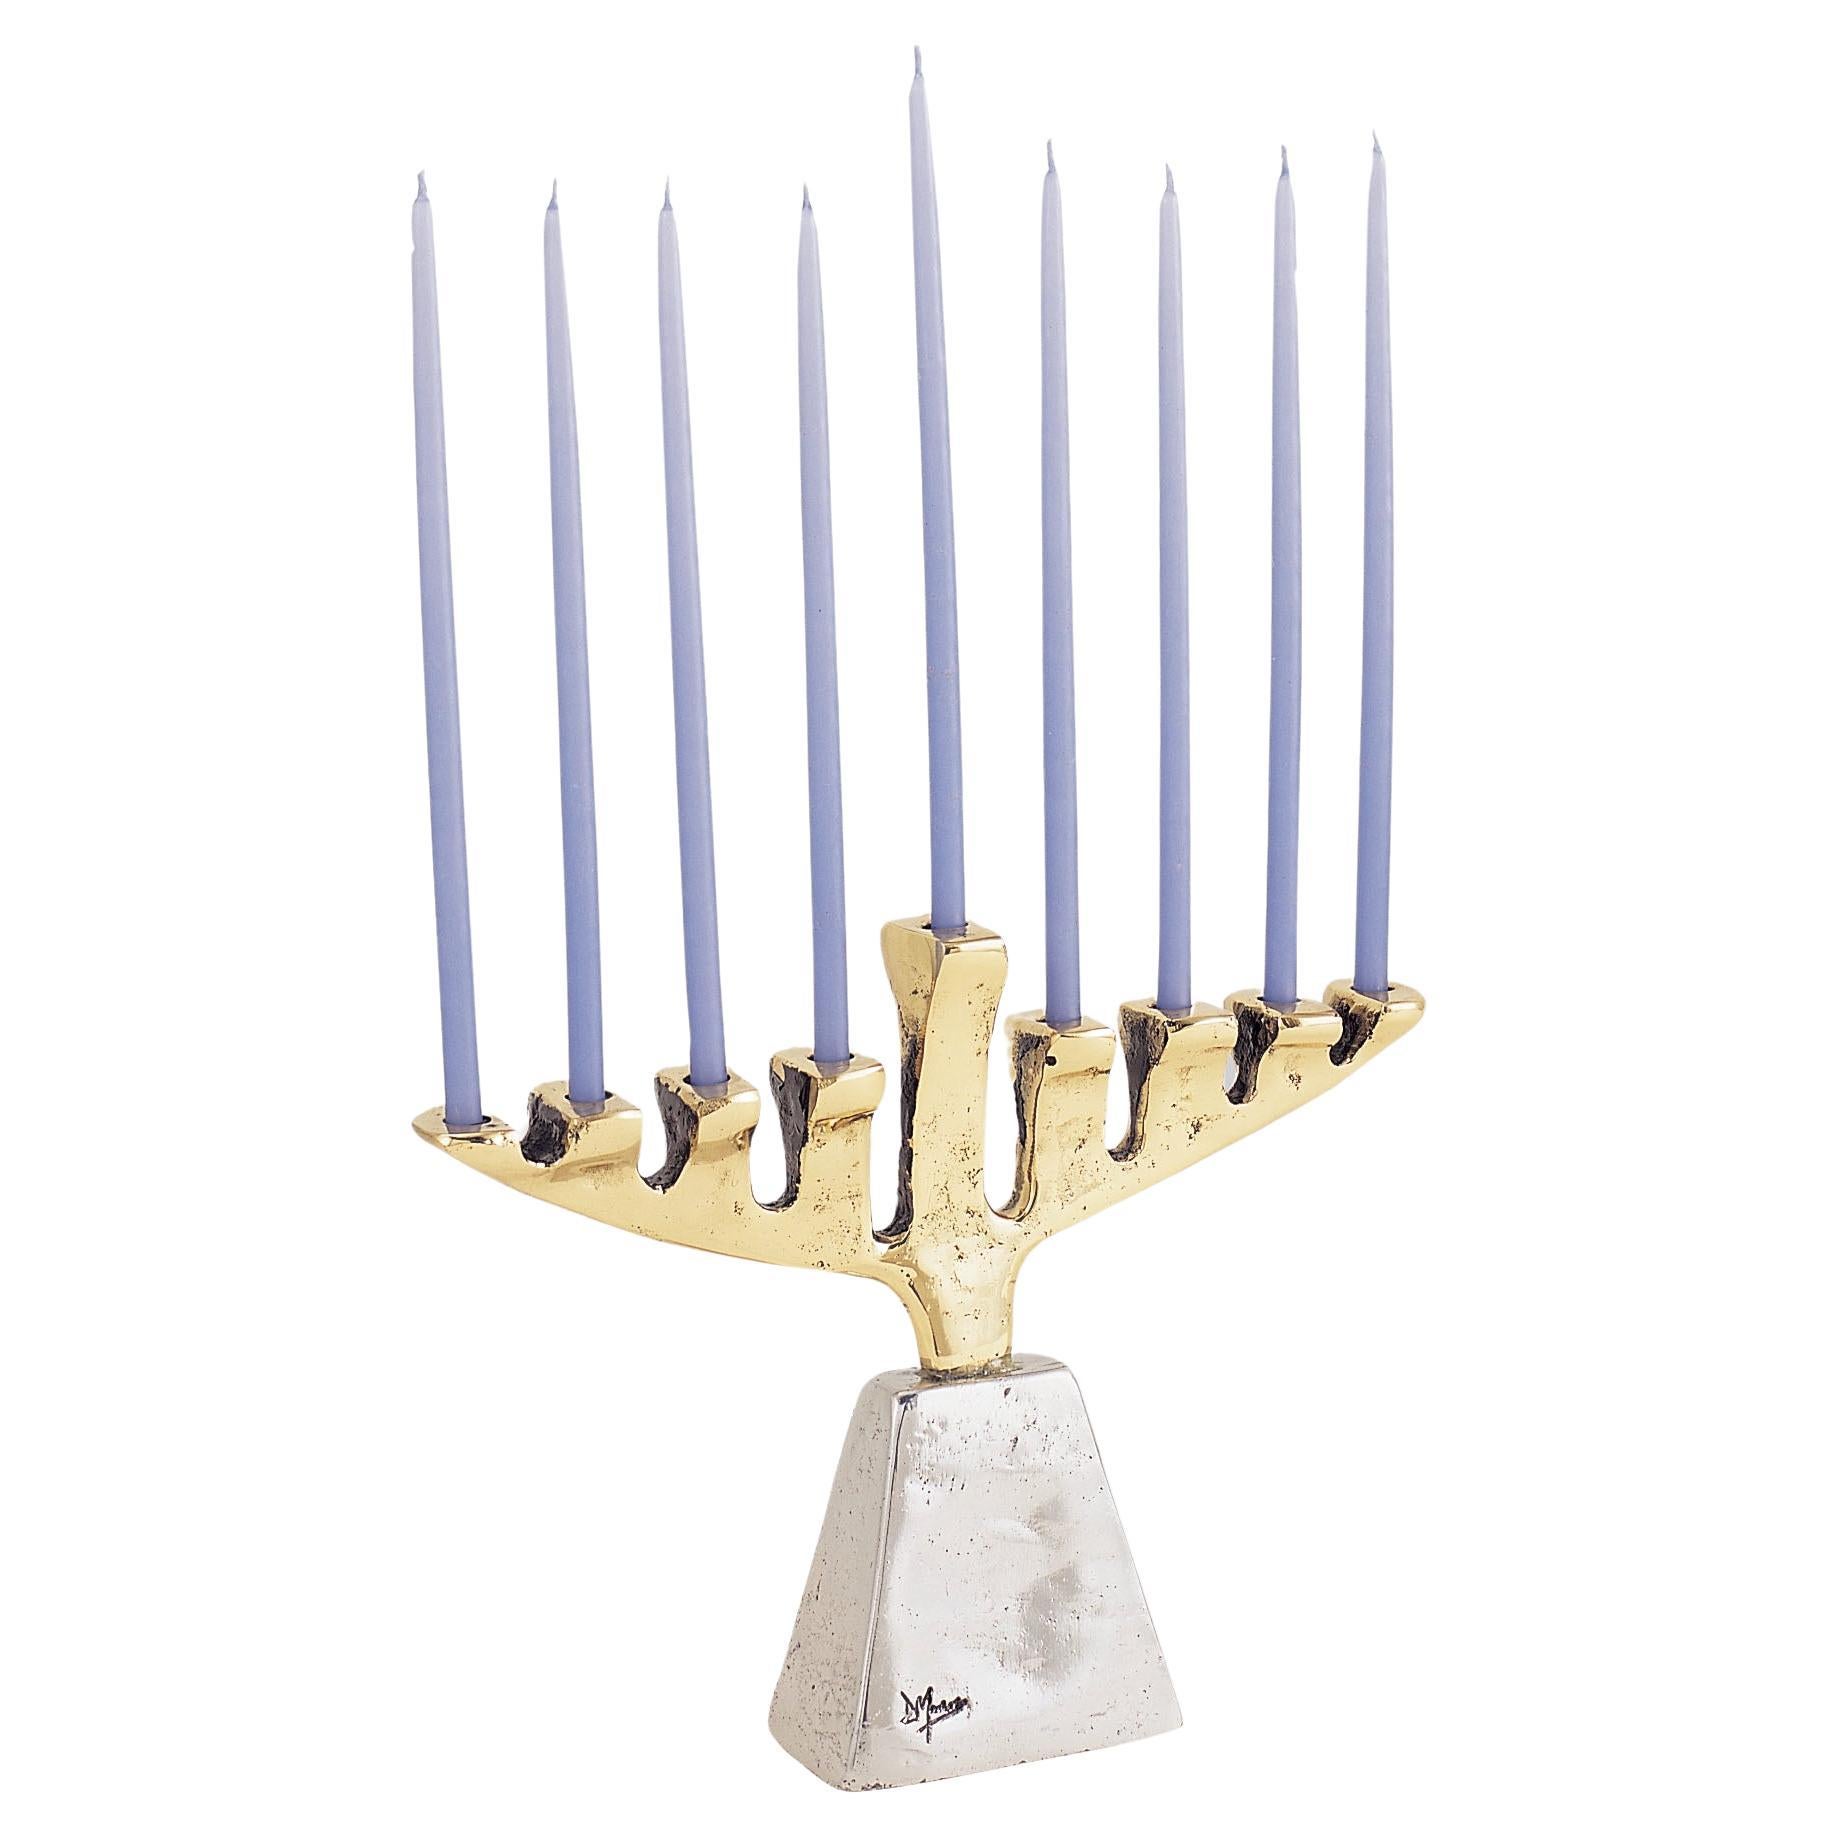 Menorah G046 two Coloured Gold Silver Handmade in Spain Tabletop Candlestick